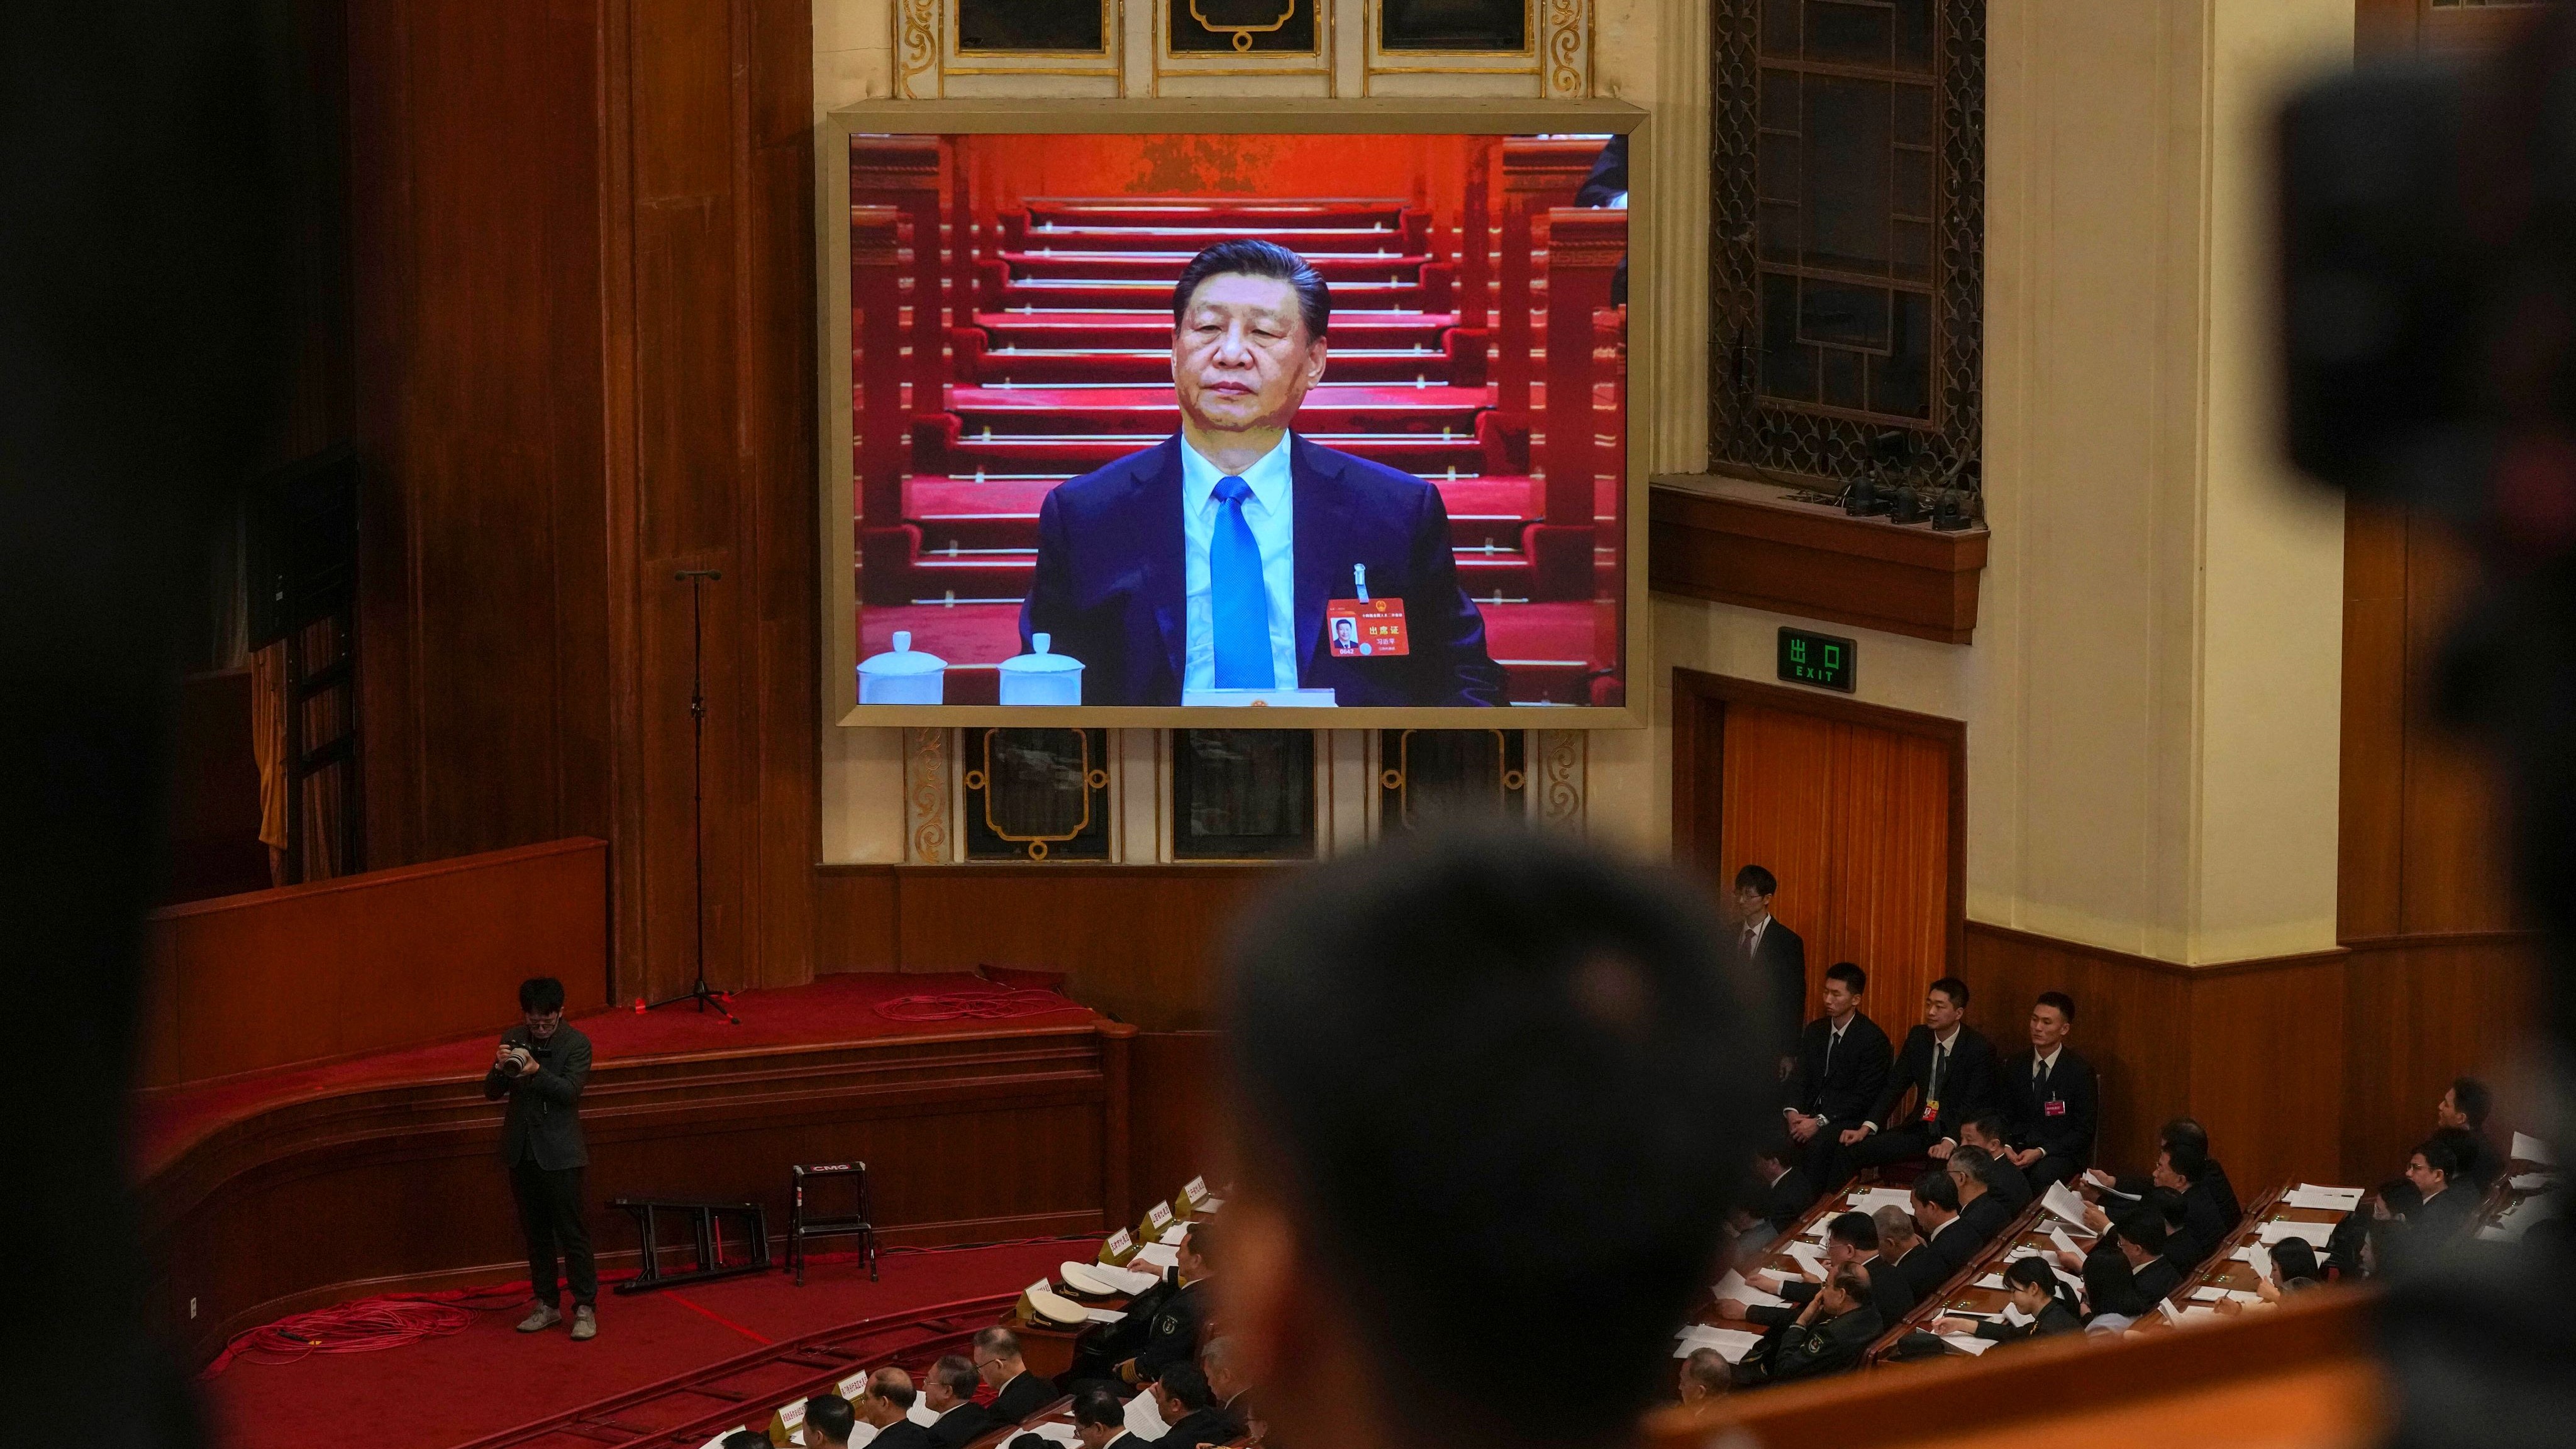 Xi prioritizes more than just growing China’s economy